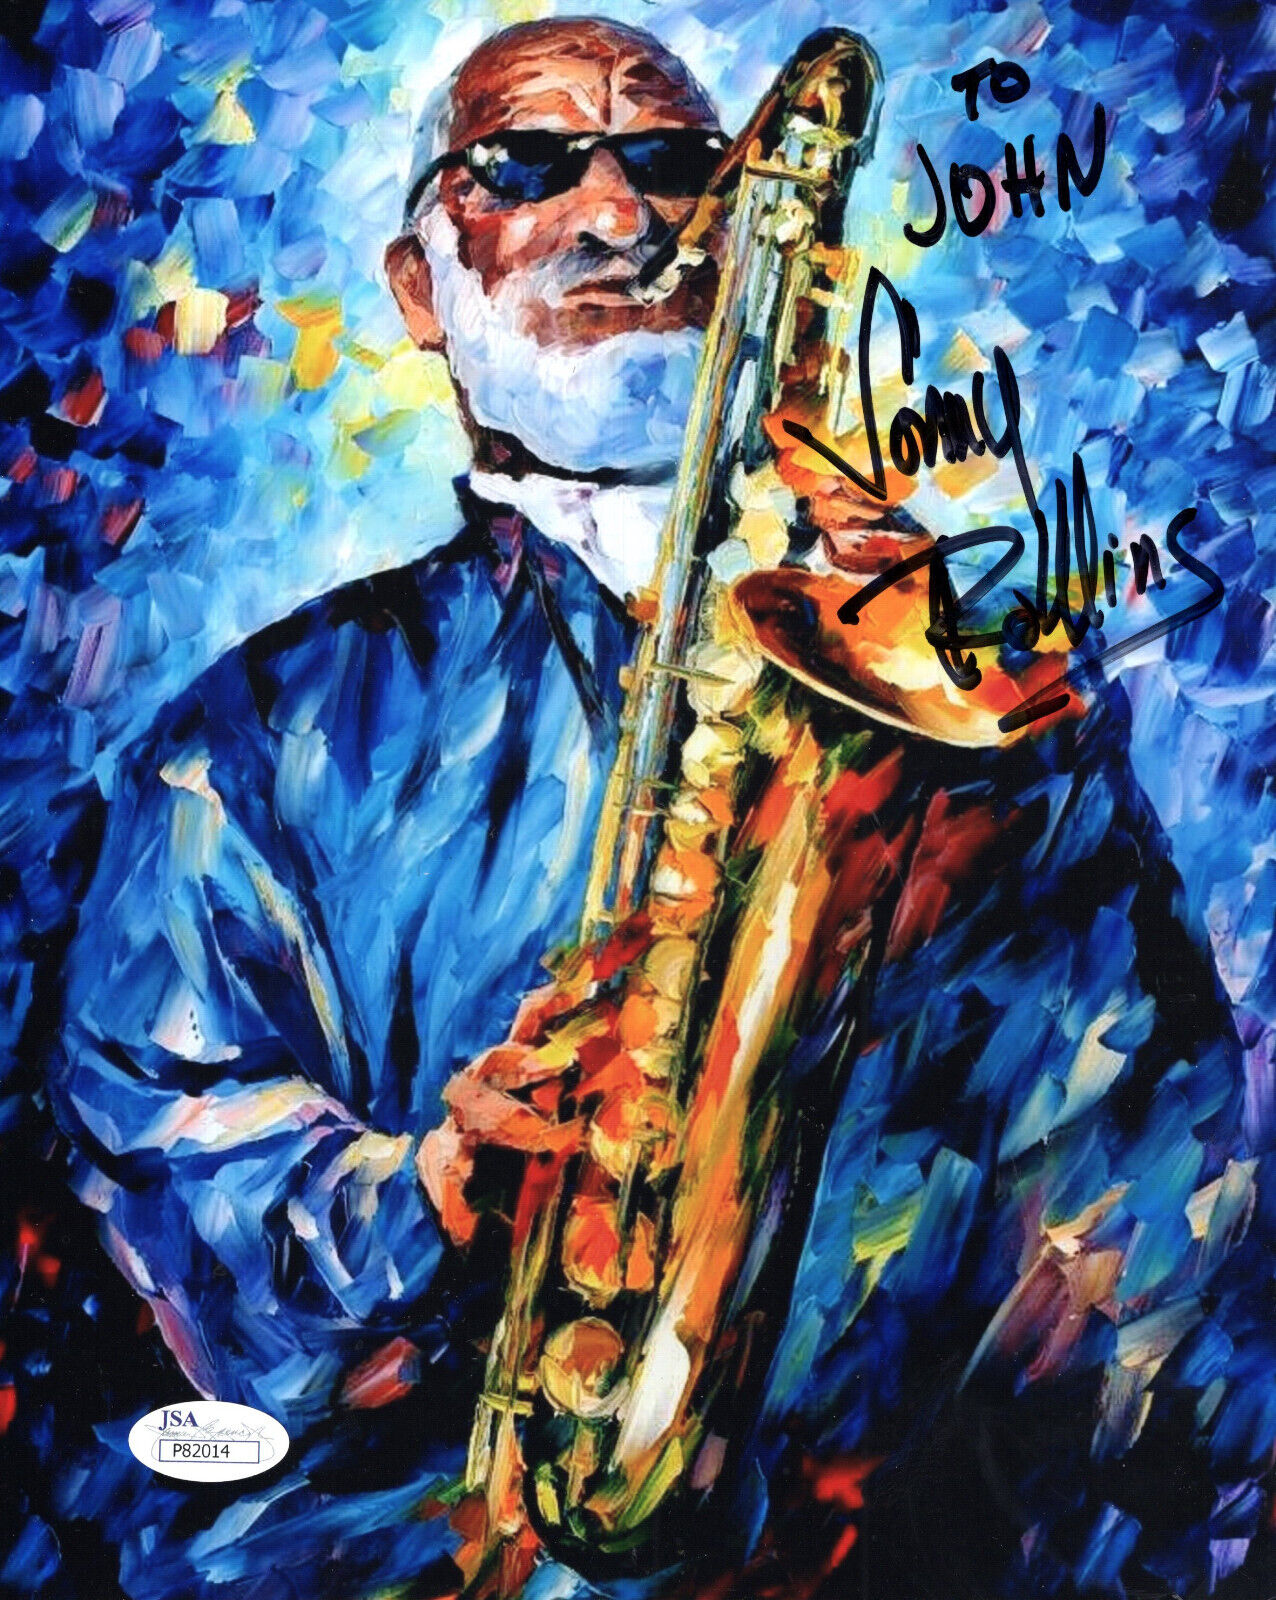 SONNY ROLLINS HAND SIGNED 8x10 COLOR PHOTO      AMAZING+RARE    TO JOHN      JSA